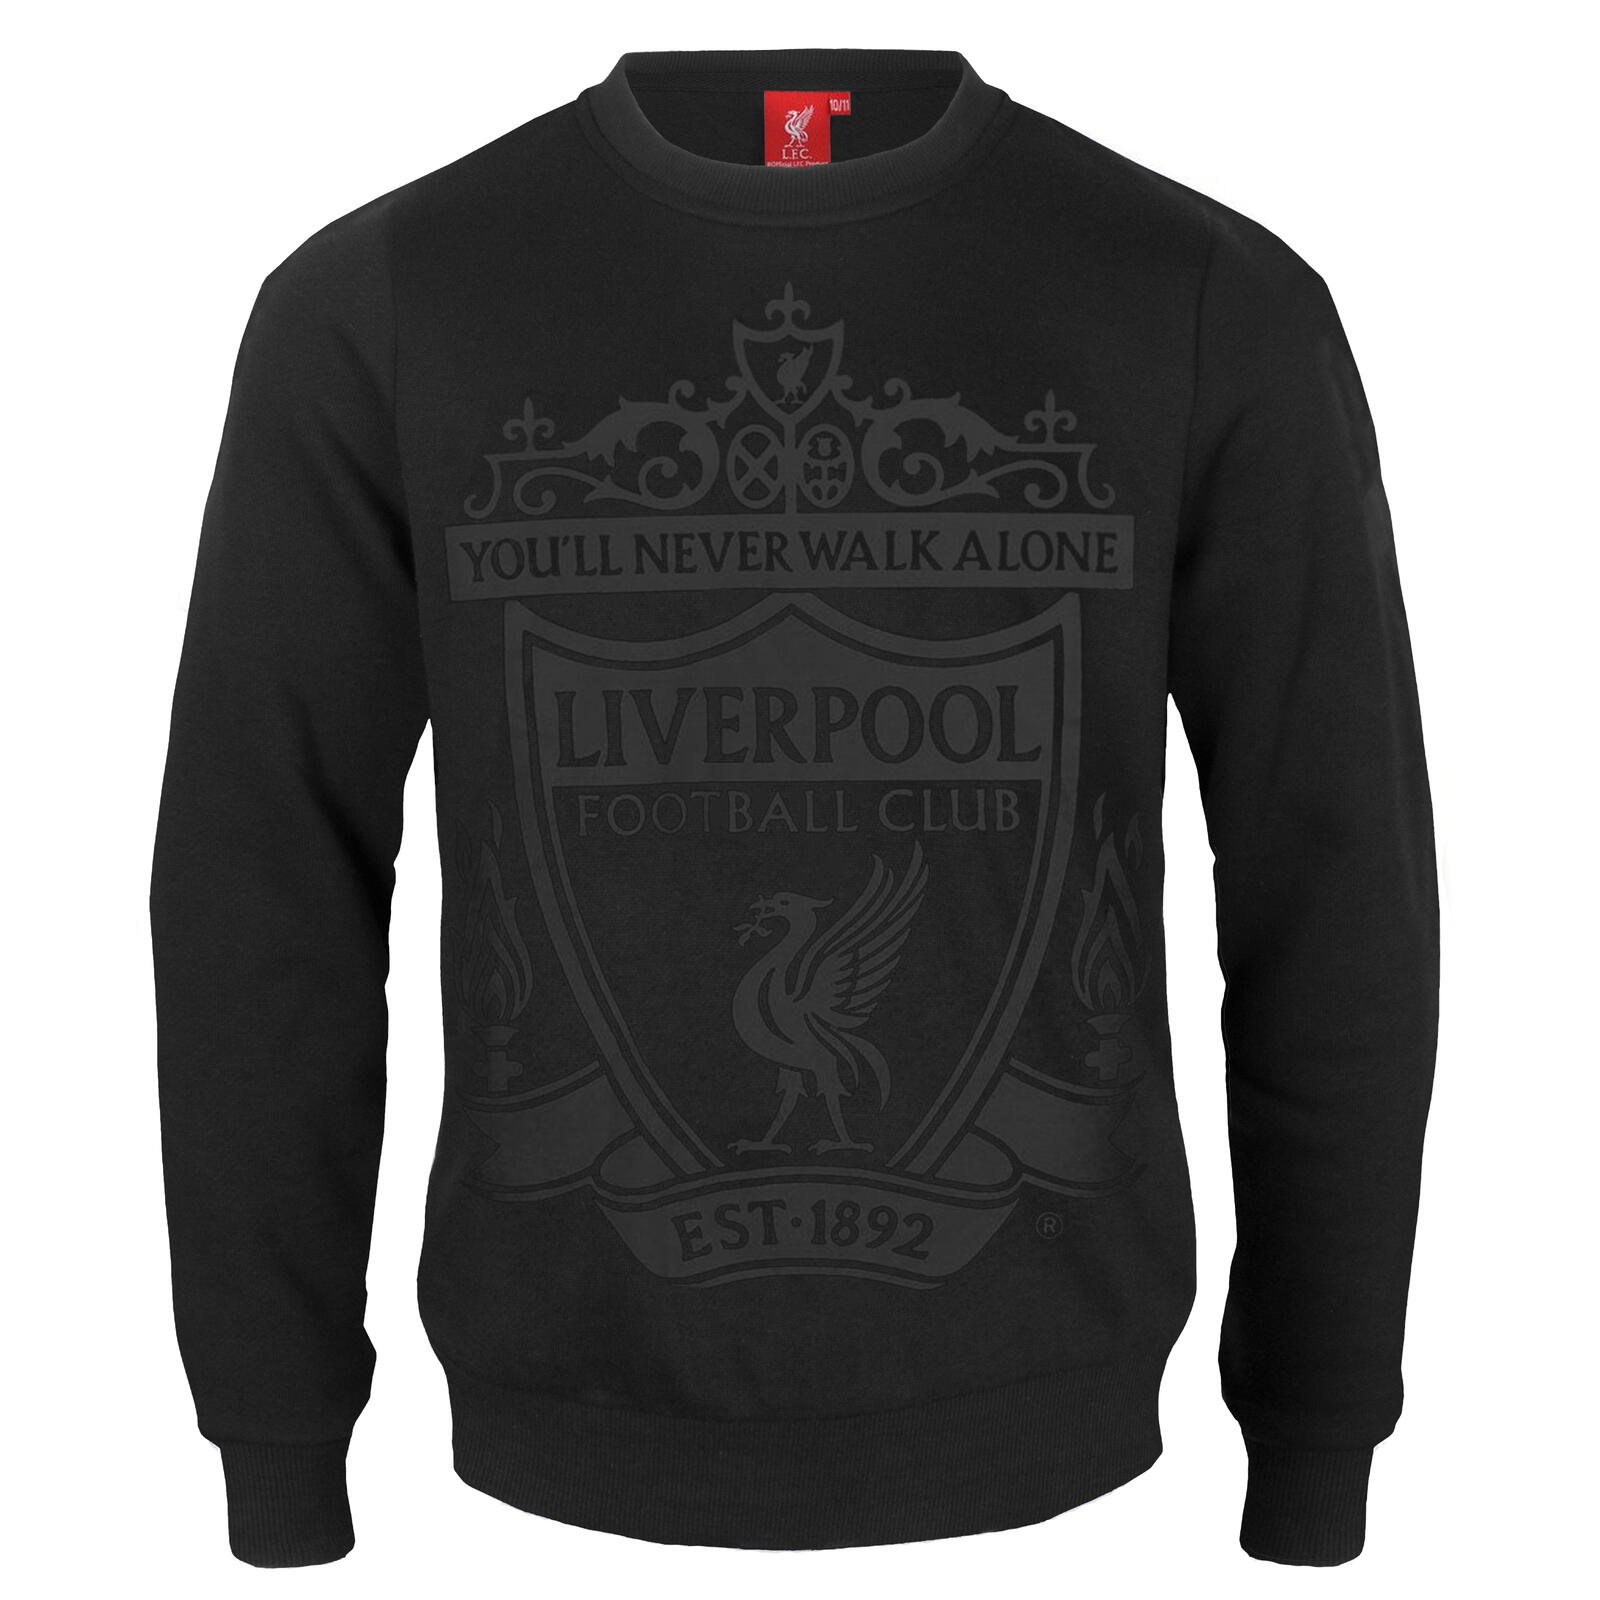 LIVERPOOL FC Liverpool FC Boys Sweatshirt Graphic Top Kids OFFICIAL Football Gift